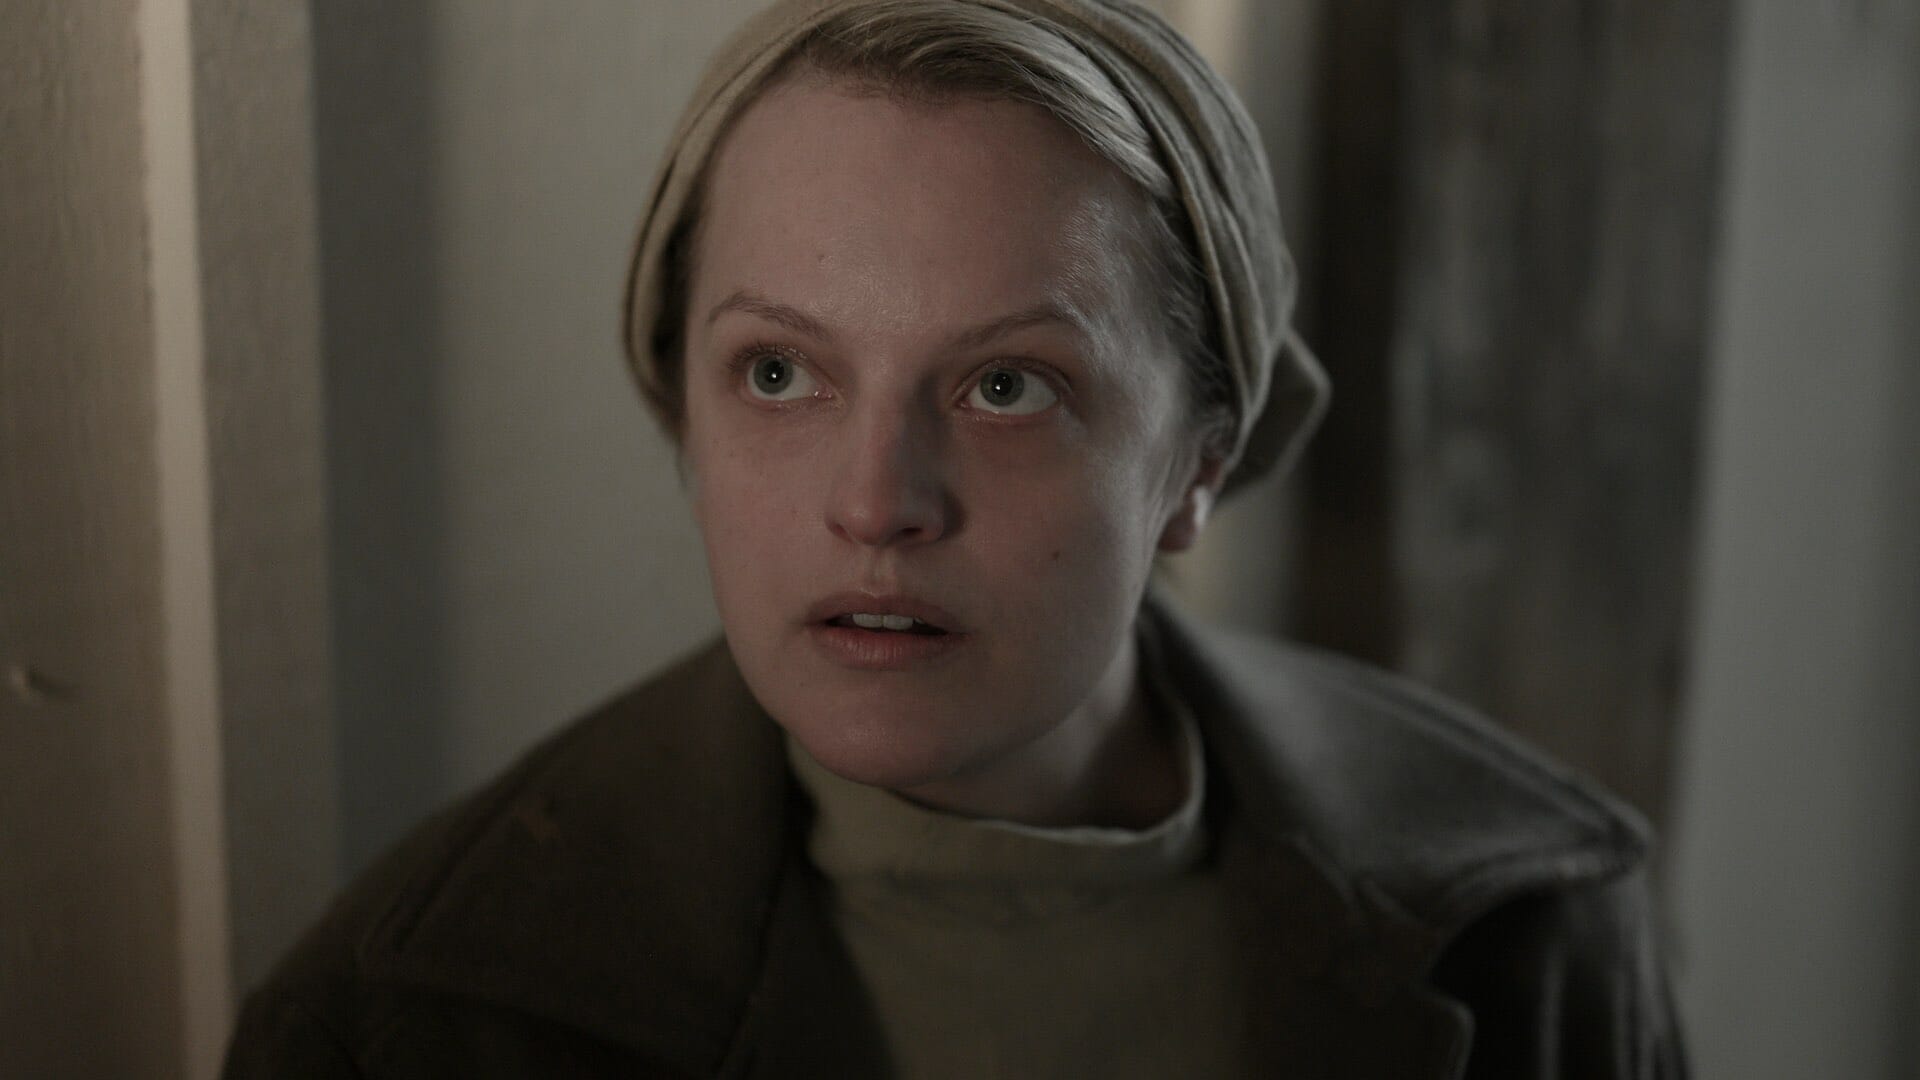 11 things to know about The Handmaid's Tale star Elisabeth Moss